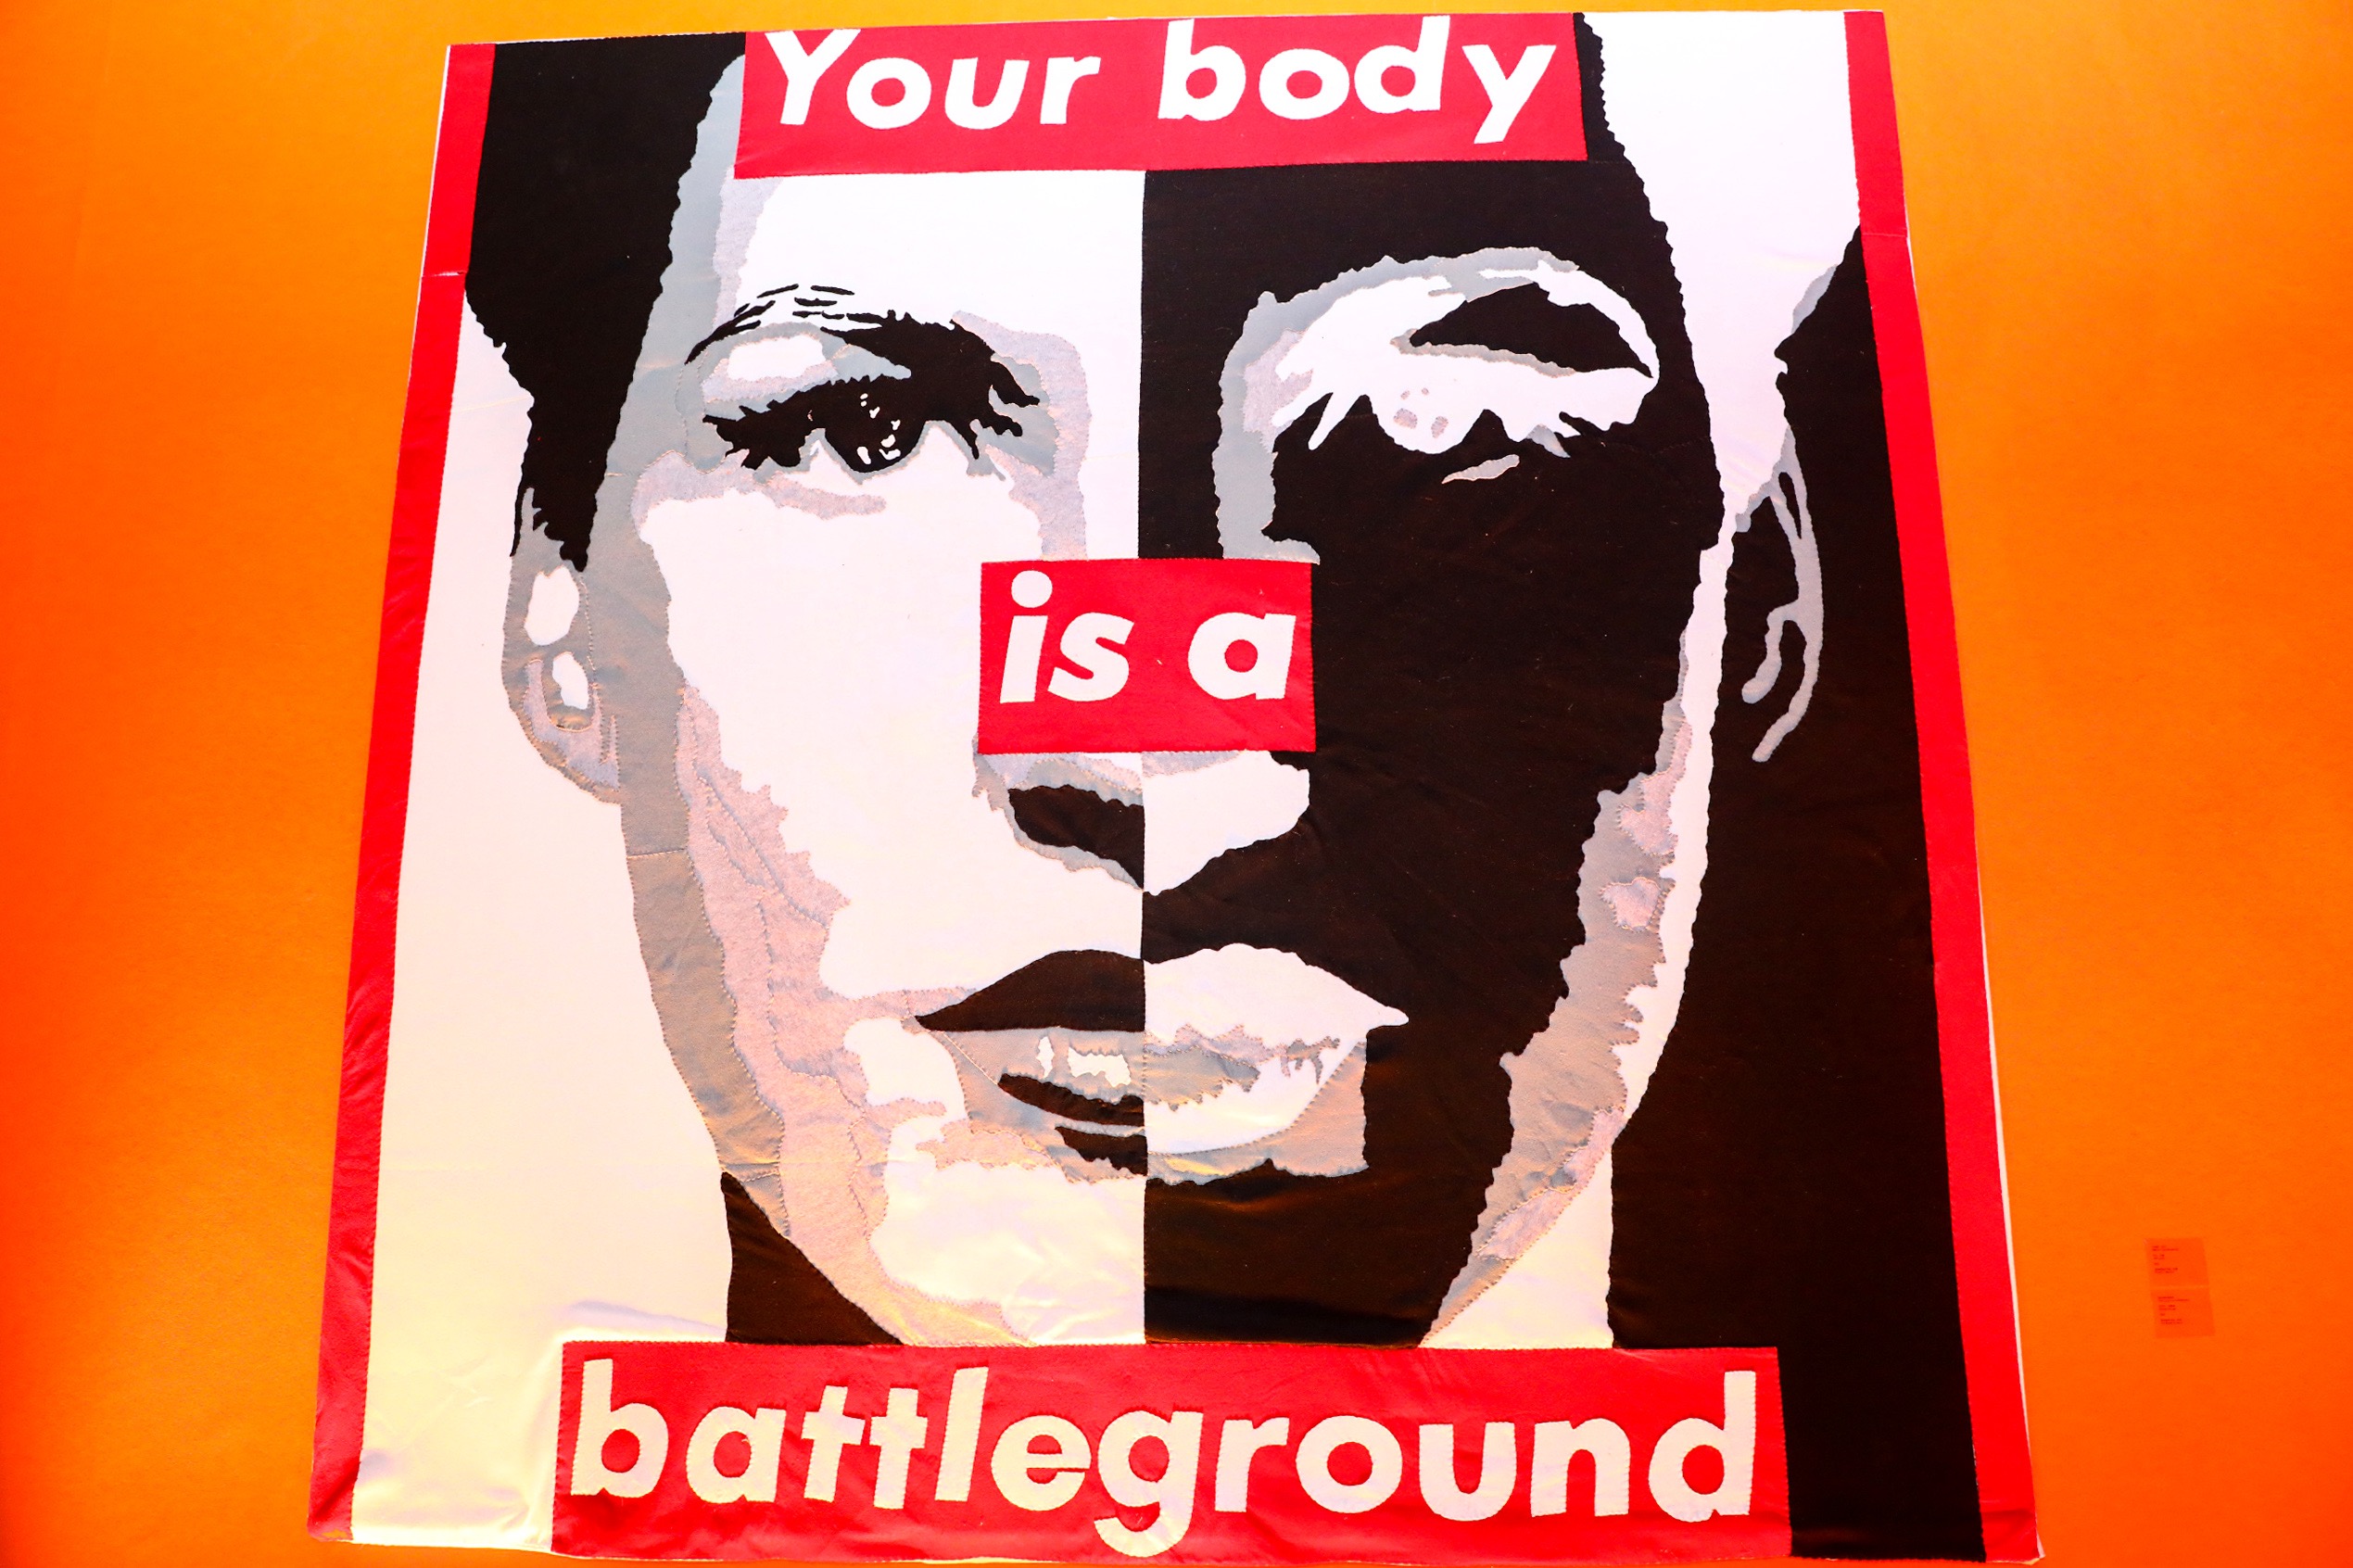 Sparrow's take on Barbara Kruger's 'Your Body is a Battleground' (M Woods/PA)